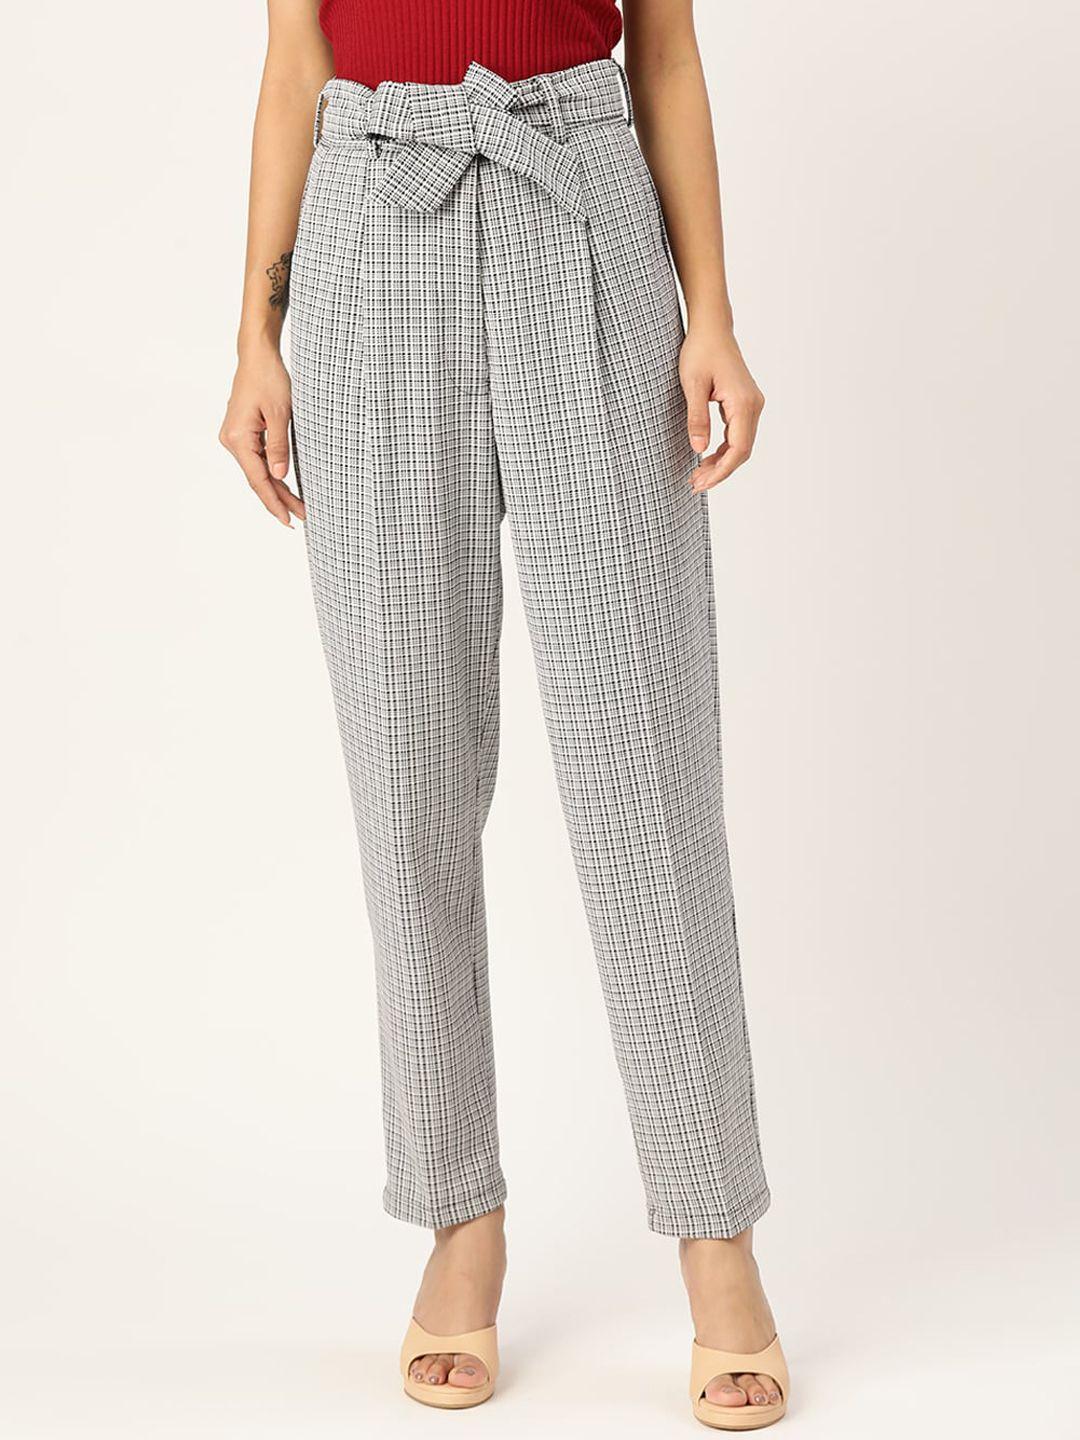 Zastraa Women Grey Striped Smart Tapered Fit High-Rise Pleated Trousers